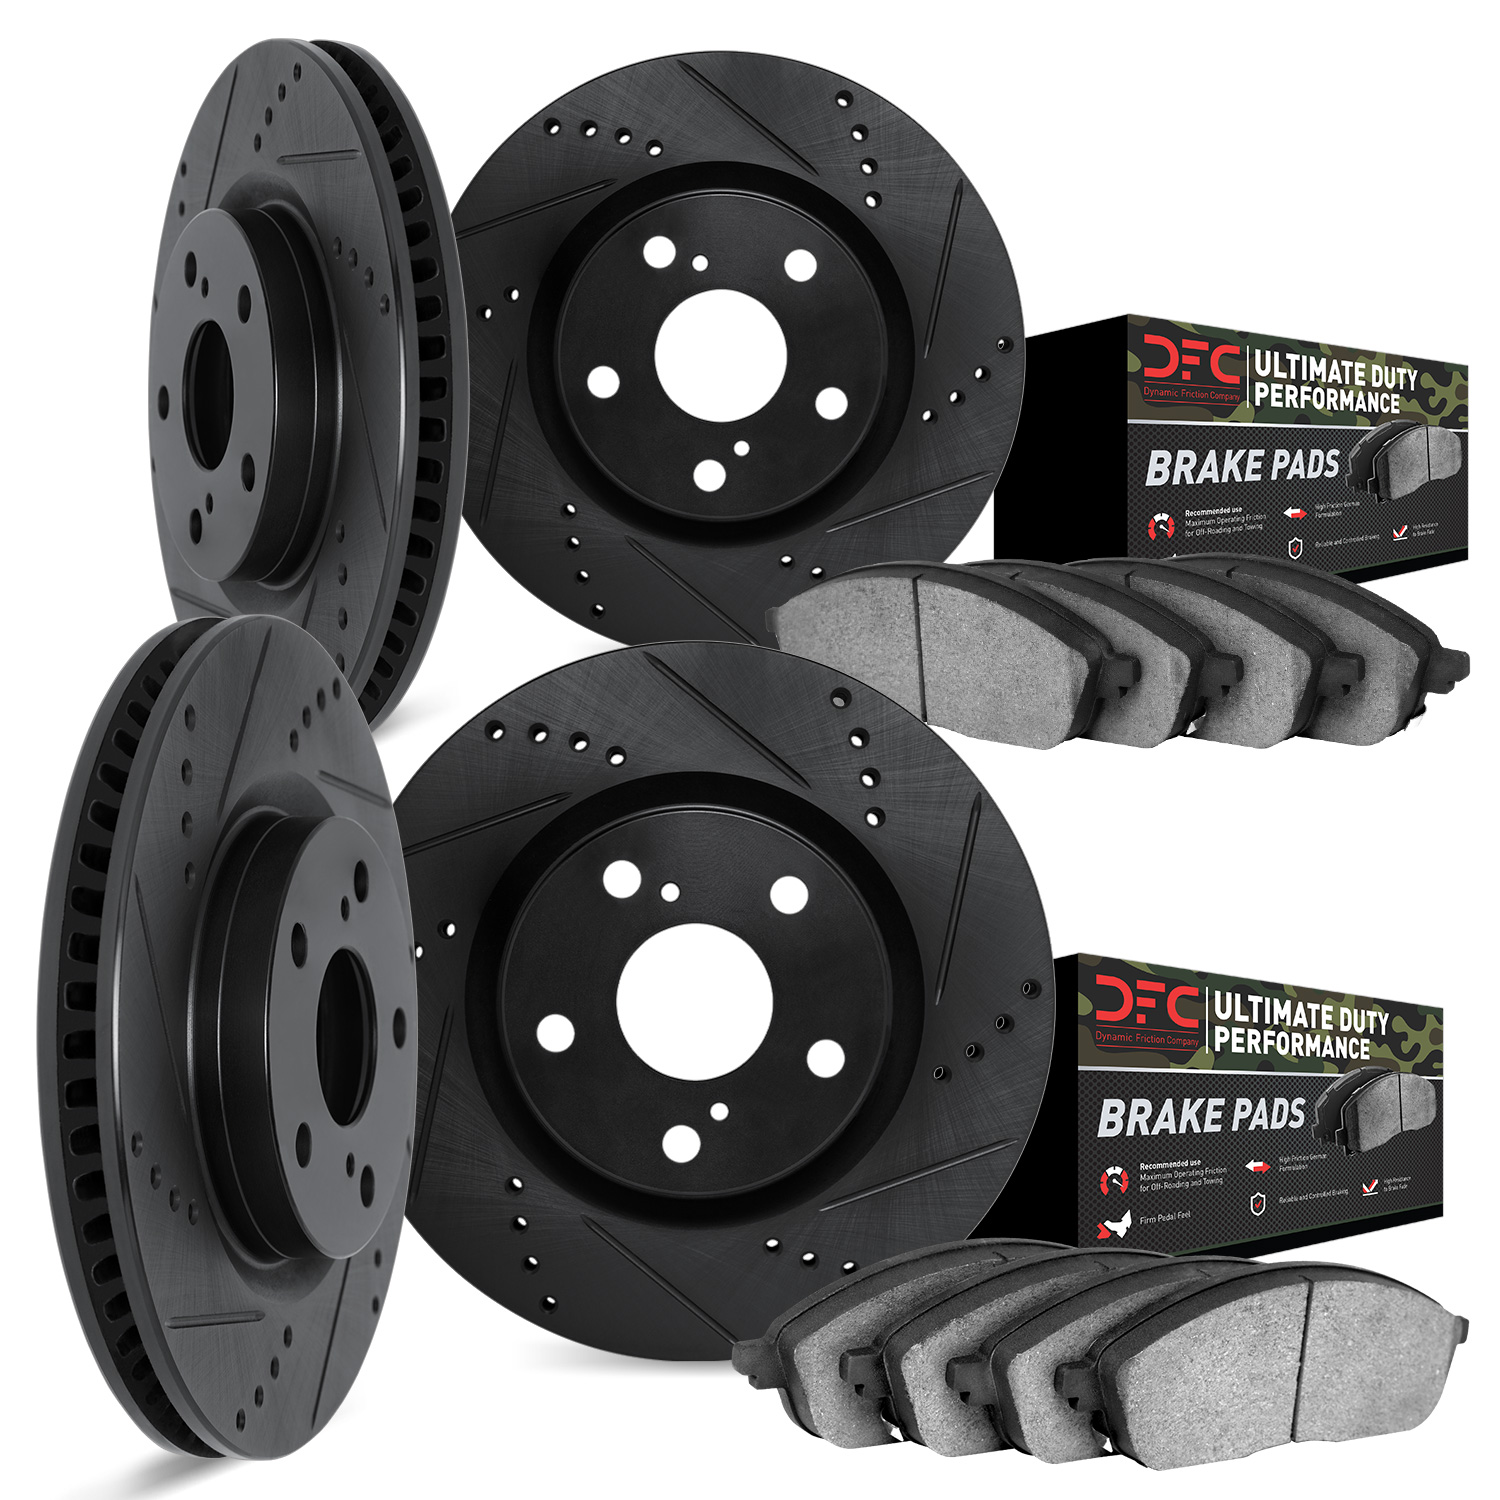 8404-45001 Drilled/Slotted Brake Rotors with Ultimate-Duty Brake Pads Kit [Black], 2010-2015 GM, Position: Front and Rear